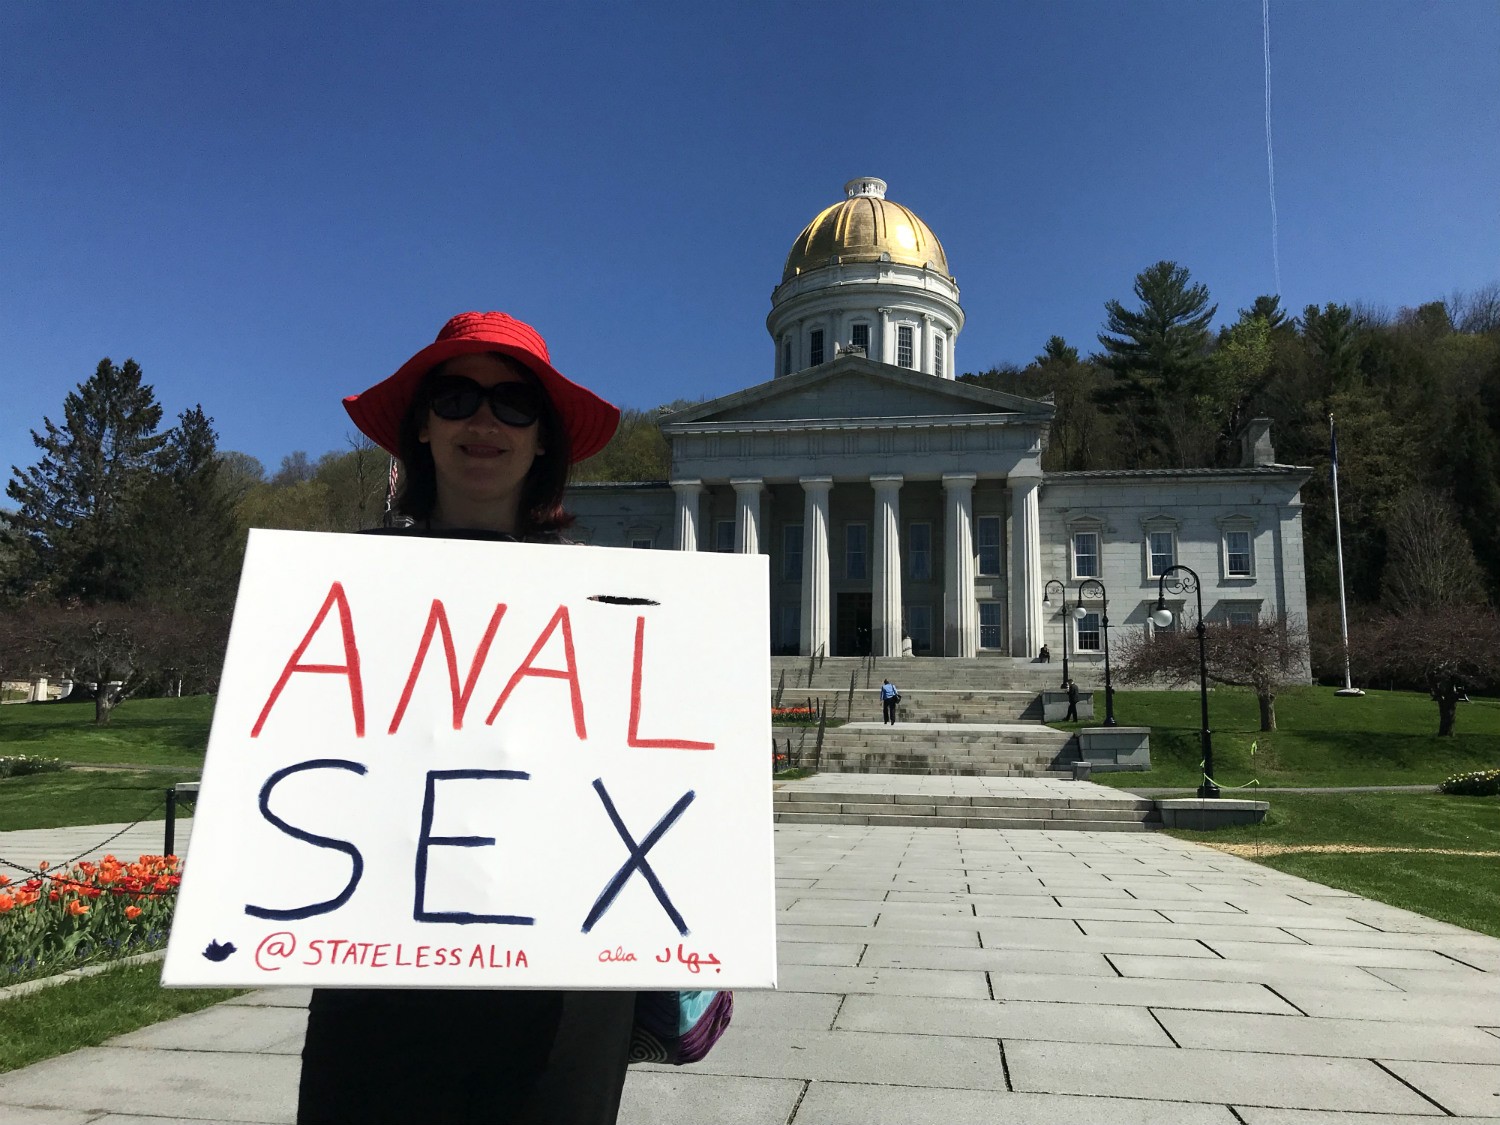 Montpeculiar: A Message of 'Anal Sex' in Front of the Statehouse | Off  Message